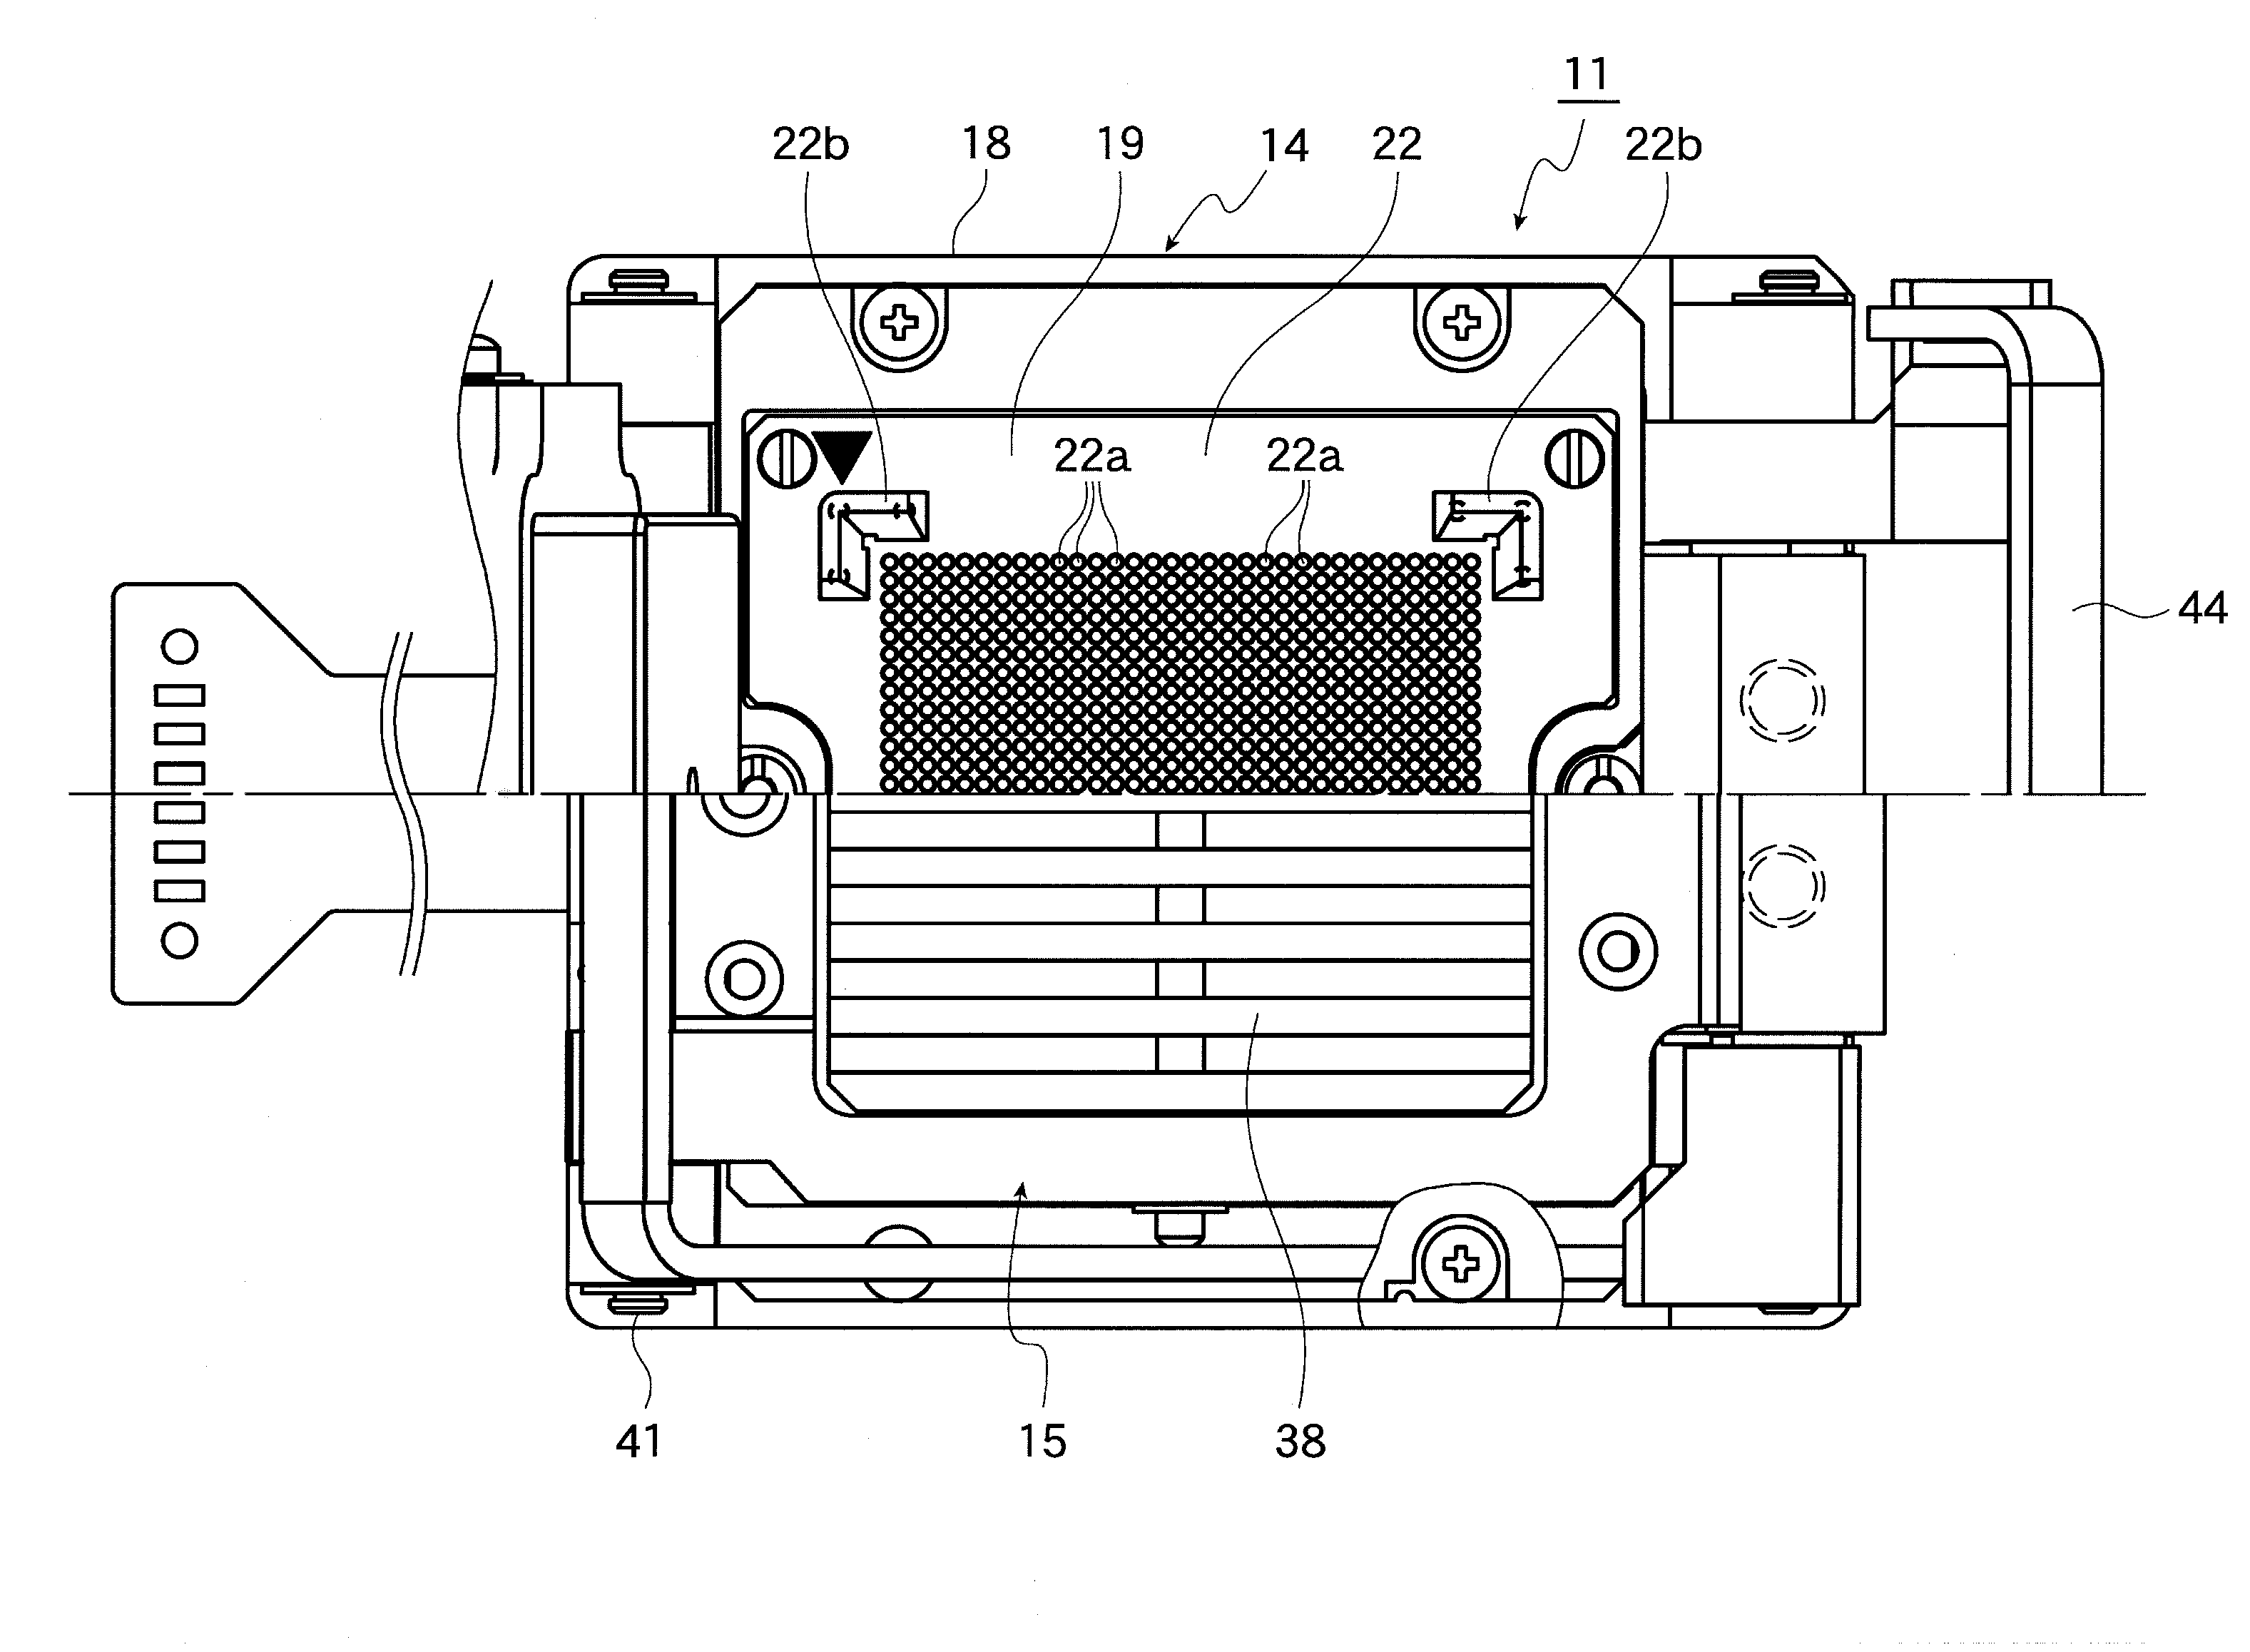 Socket for electrical part